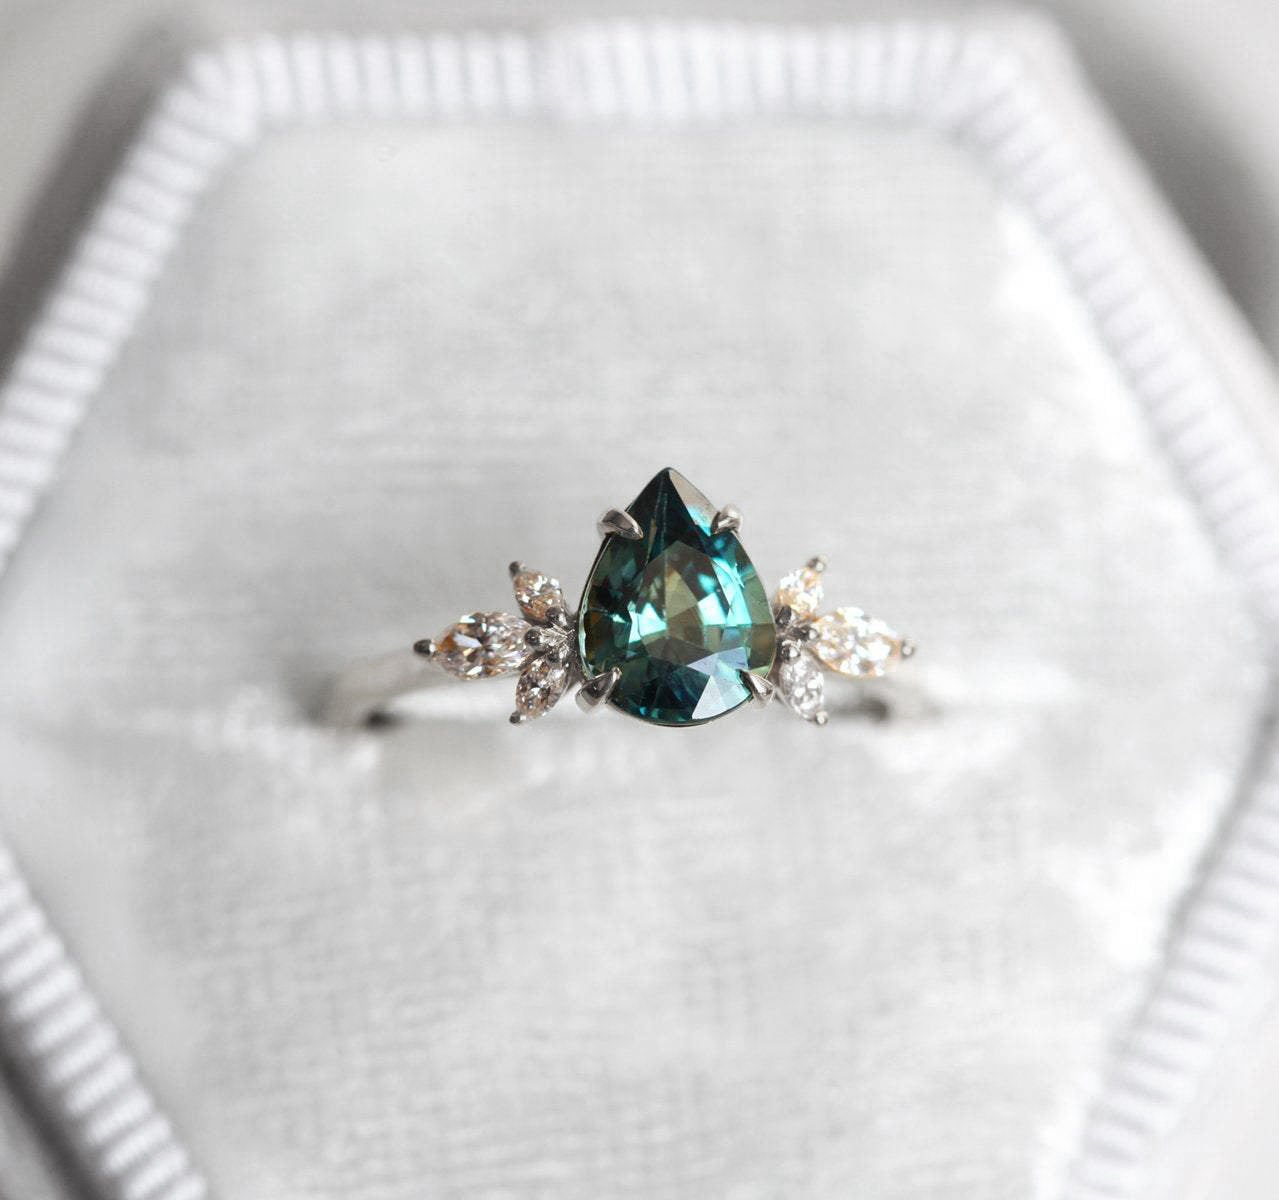 Pear-shaped teal sapphire ring with diamond cluster